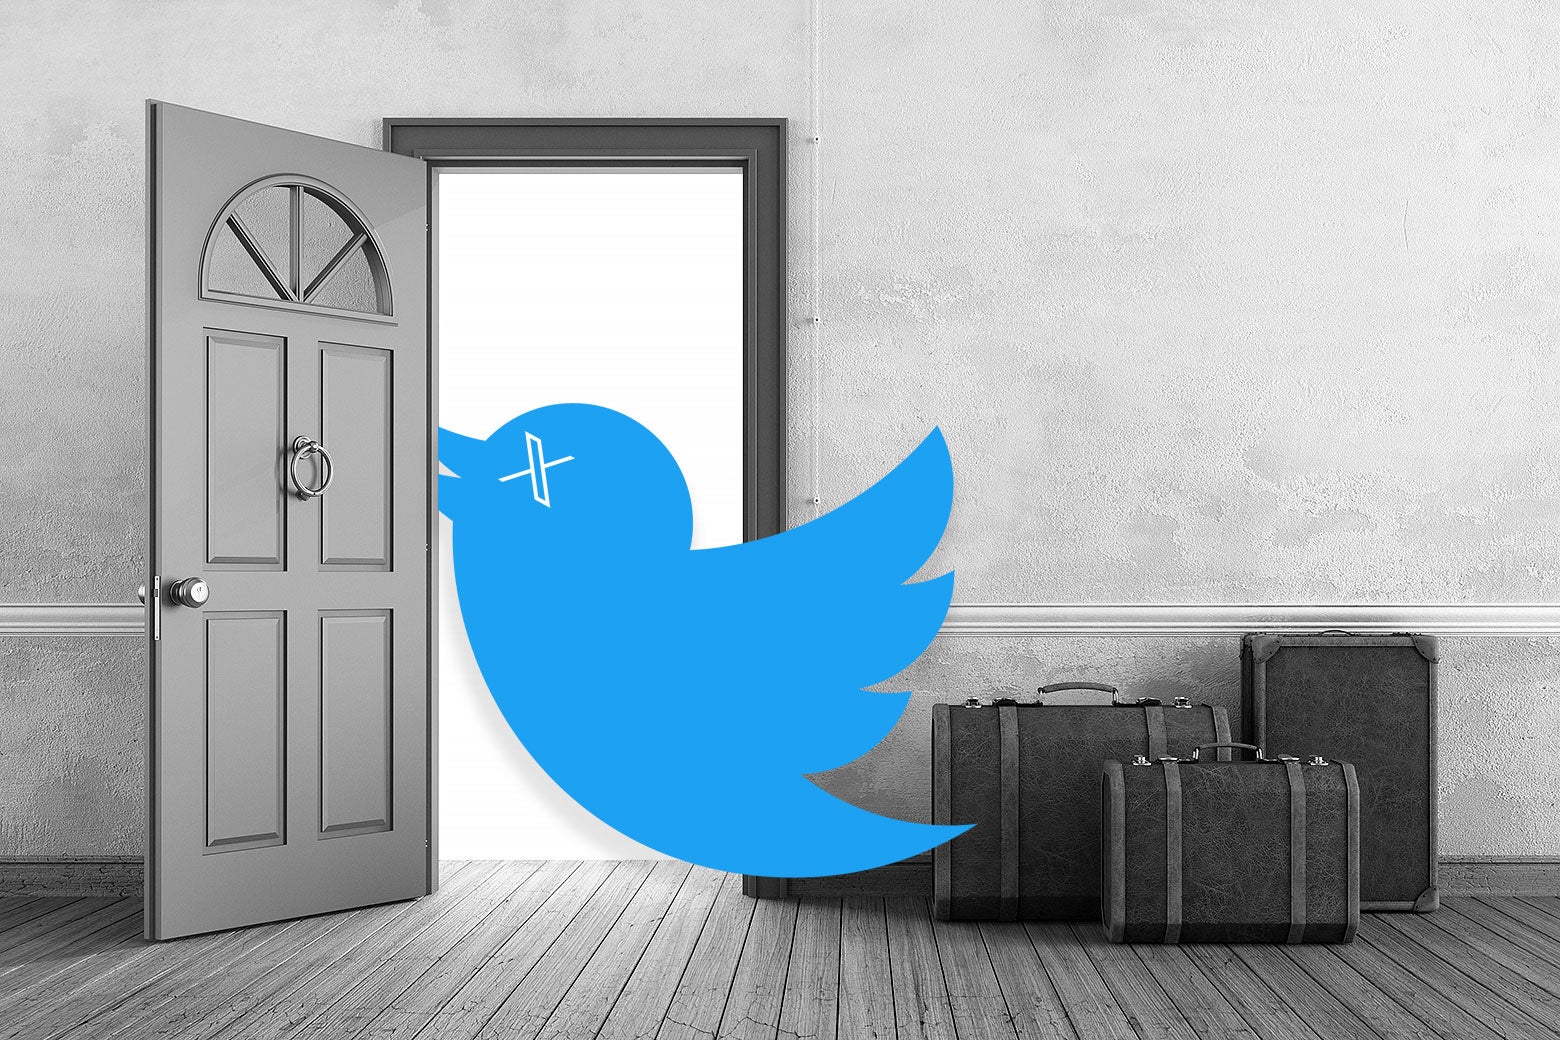 The old Twitter bird logo, with new logo X's for eyes, leaves through an open front door of a house. To the bird's right are multiple packed suitcases.